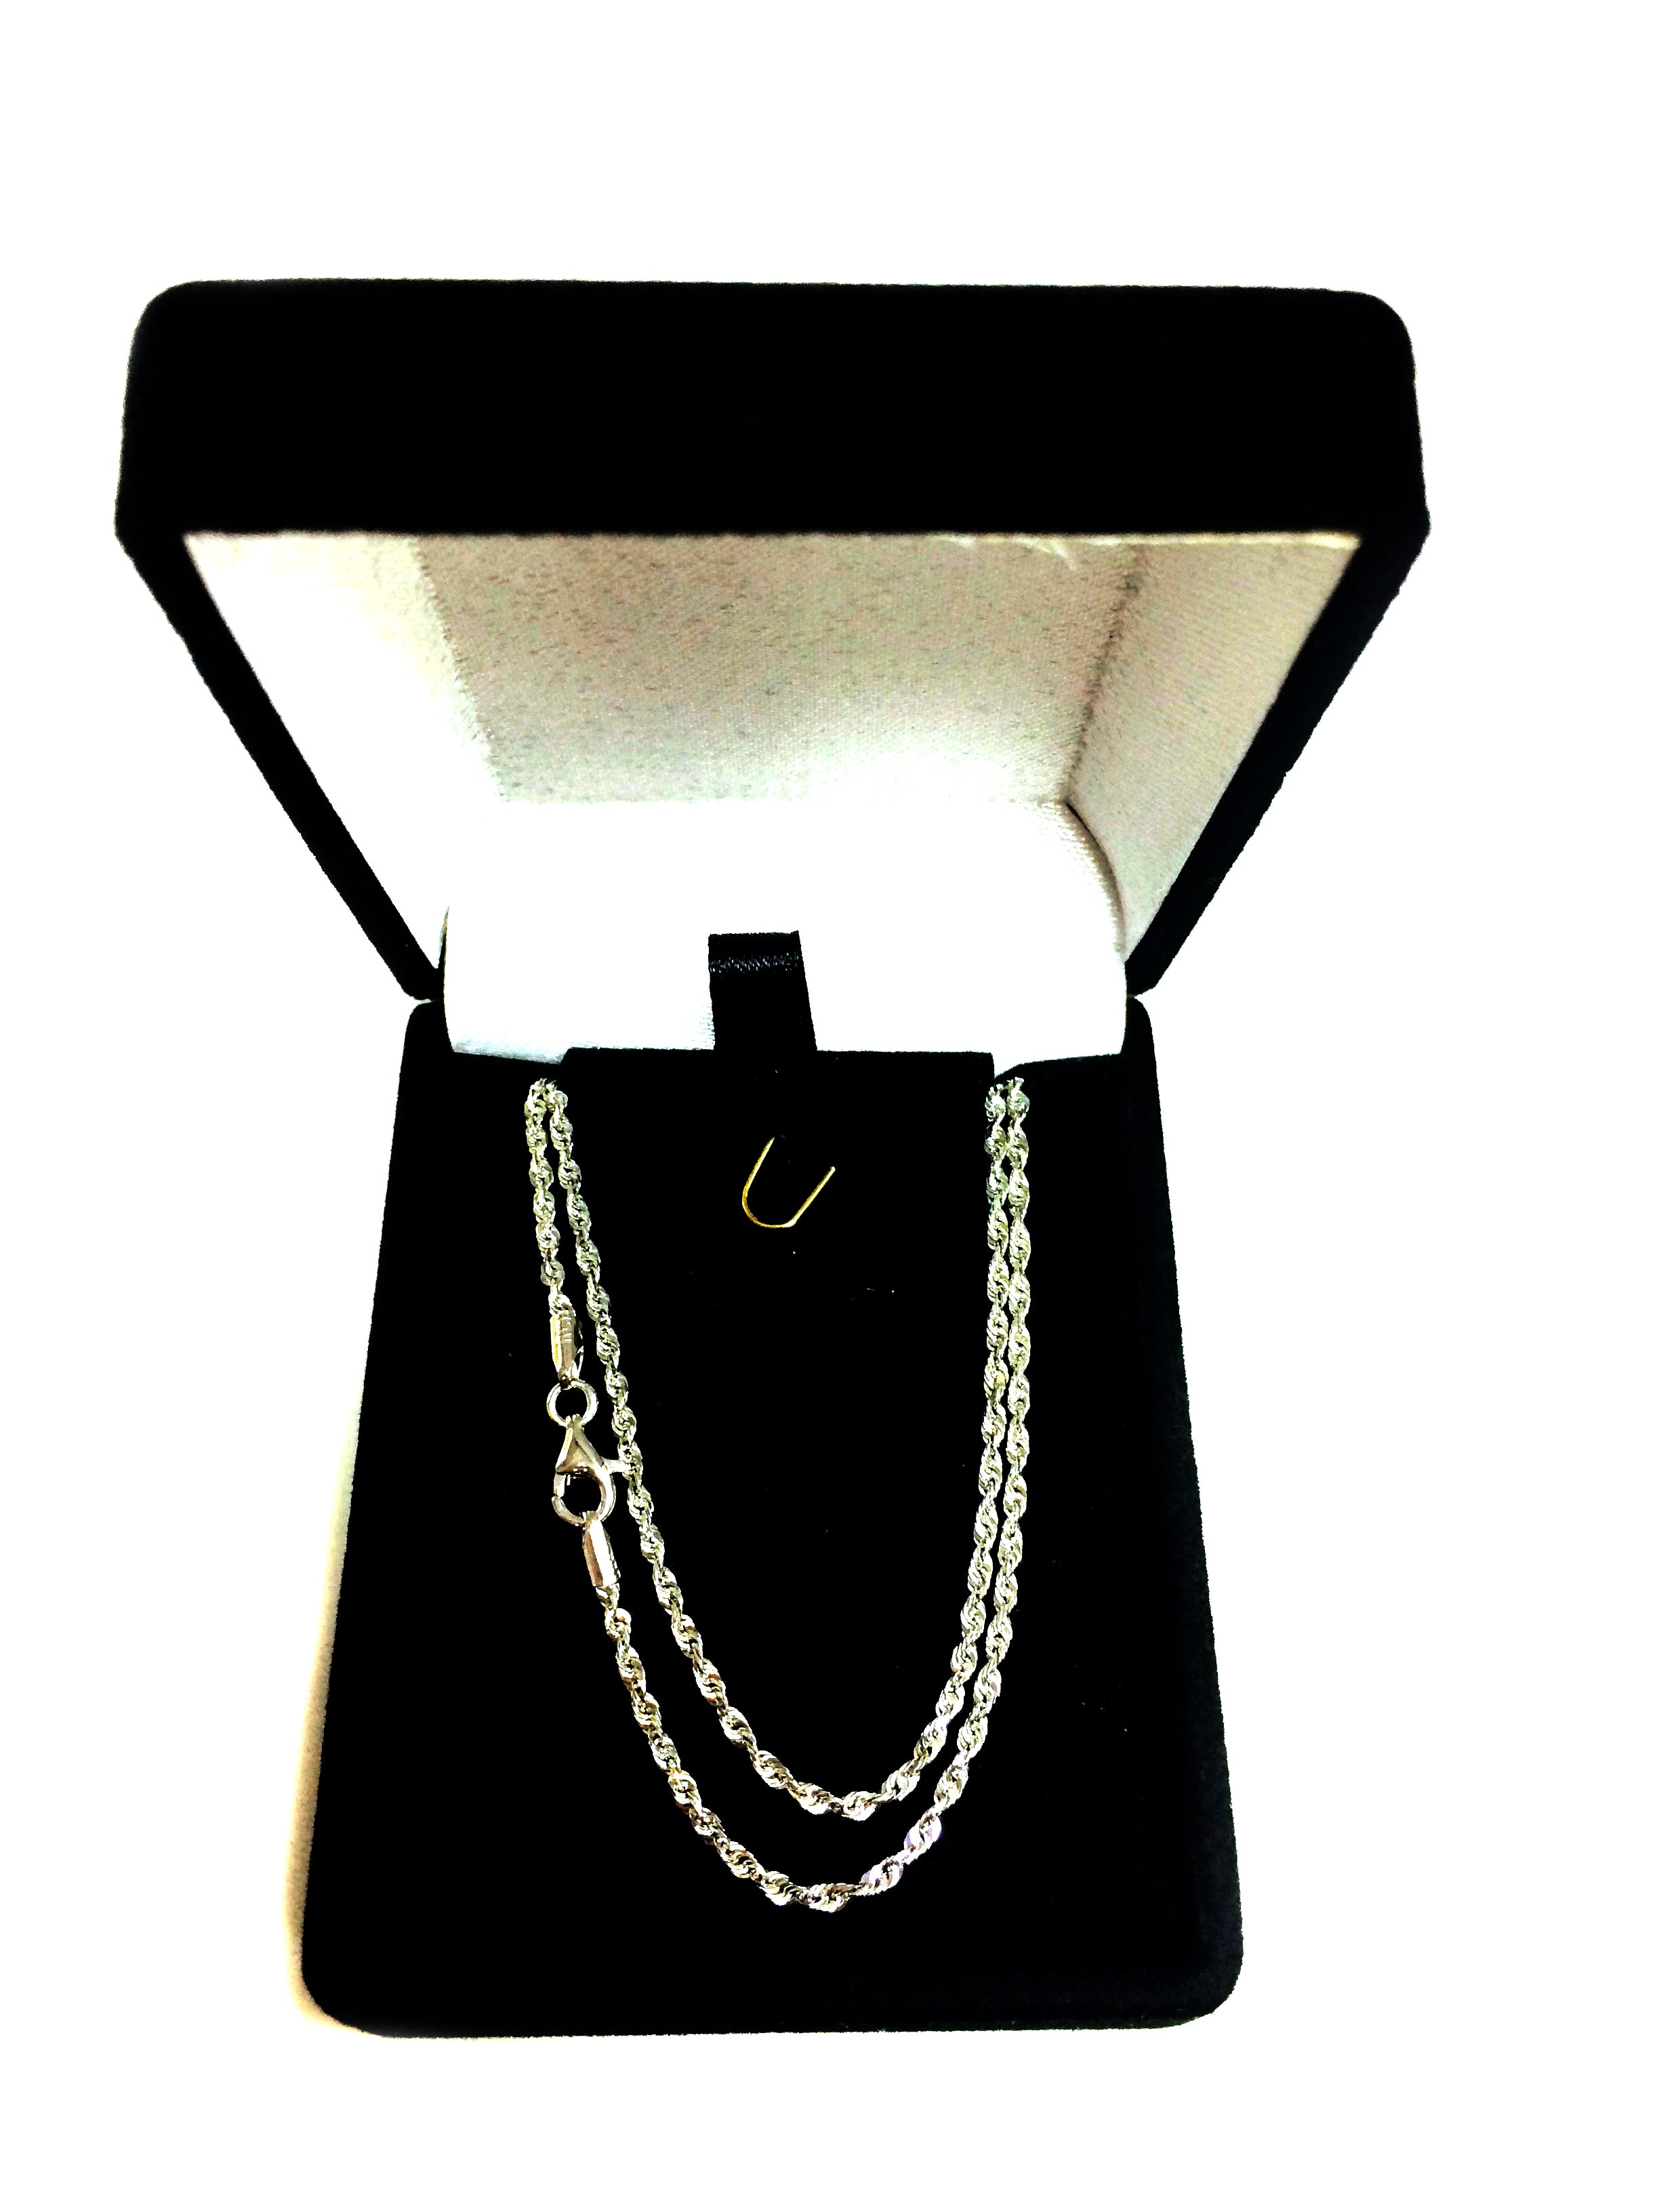 14k White Solid Gold Diamond Cut Rope Chain Necklace, 2.0mm